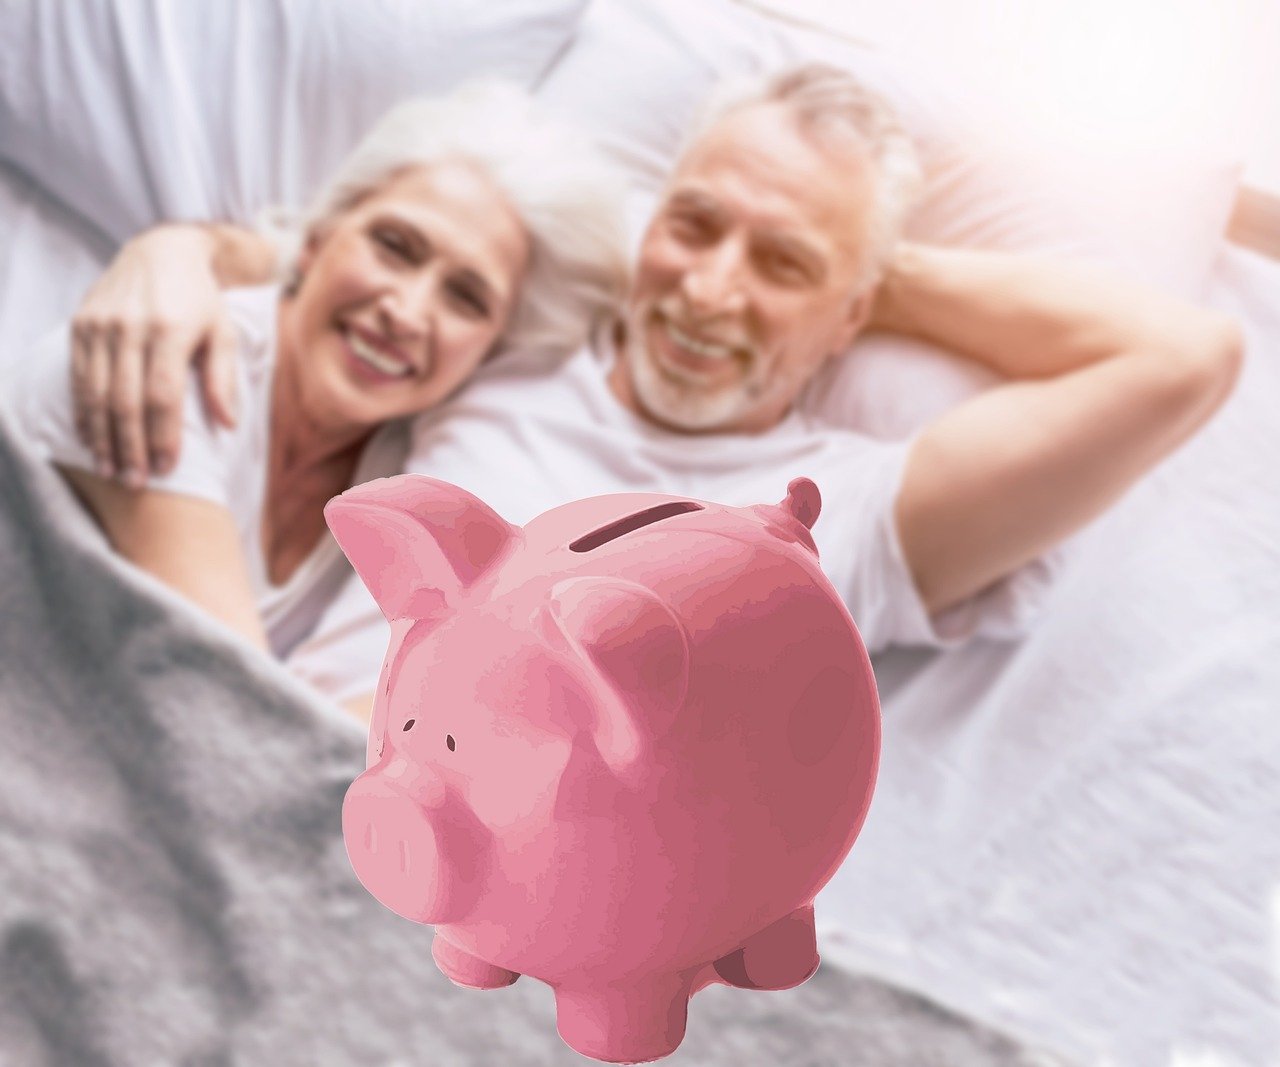 smiling retirees relaxing in bed with a pink piggy bank in the foreground representing their nest egg